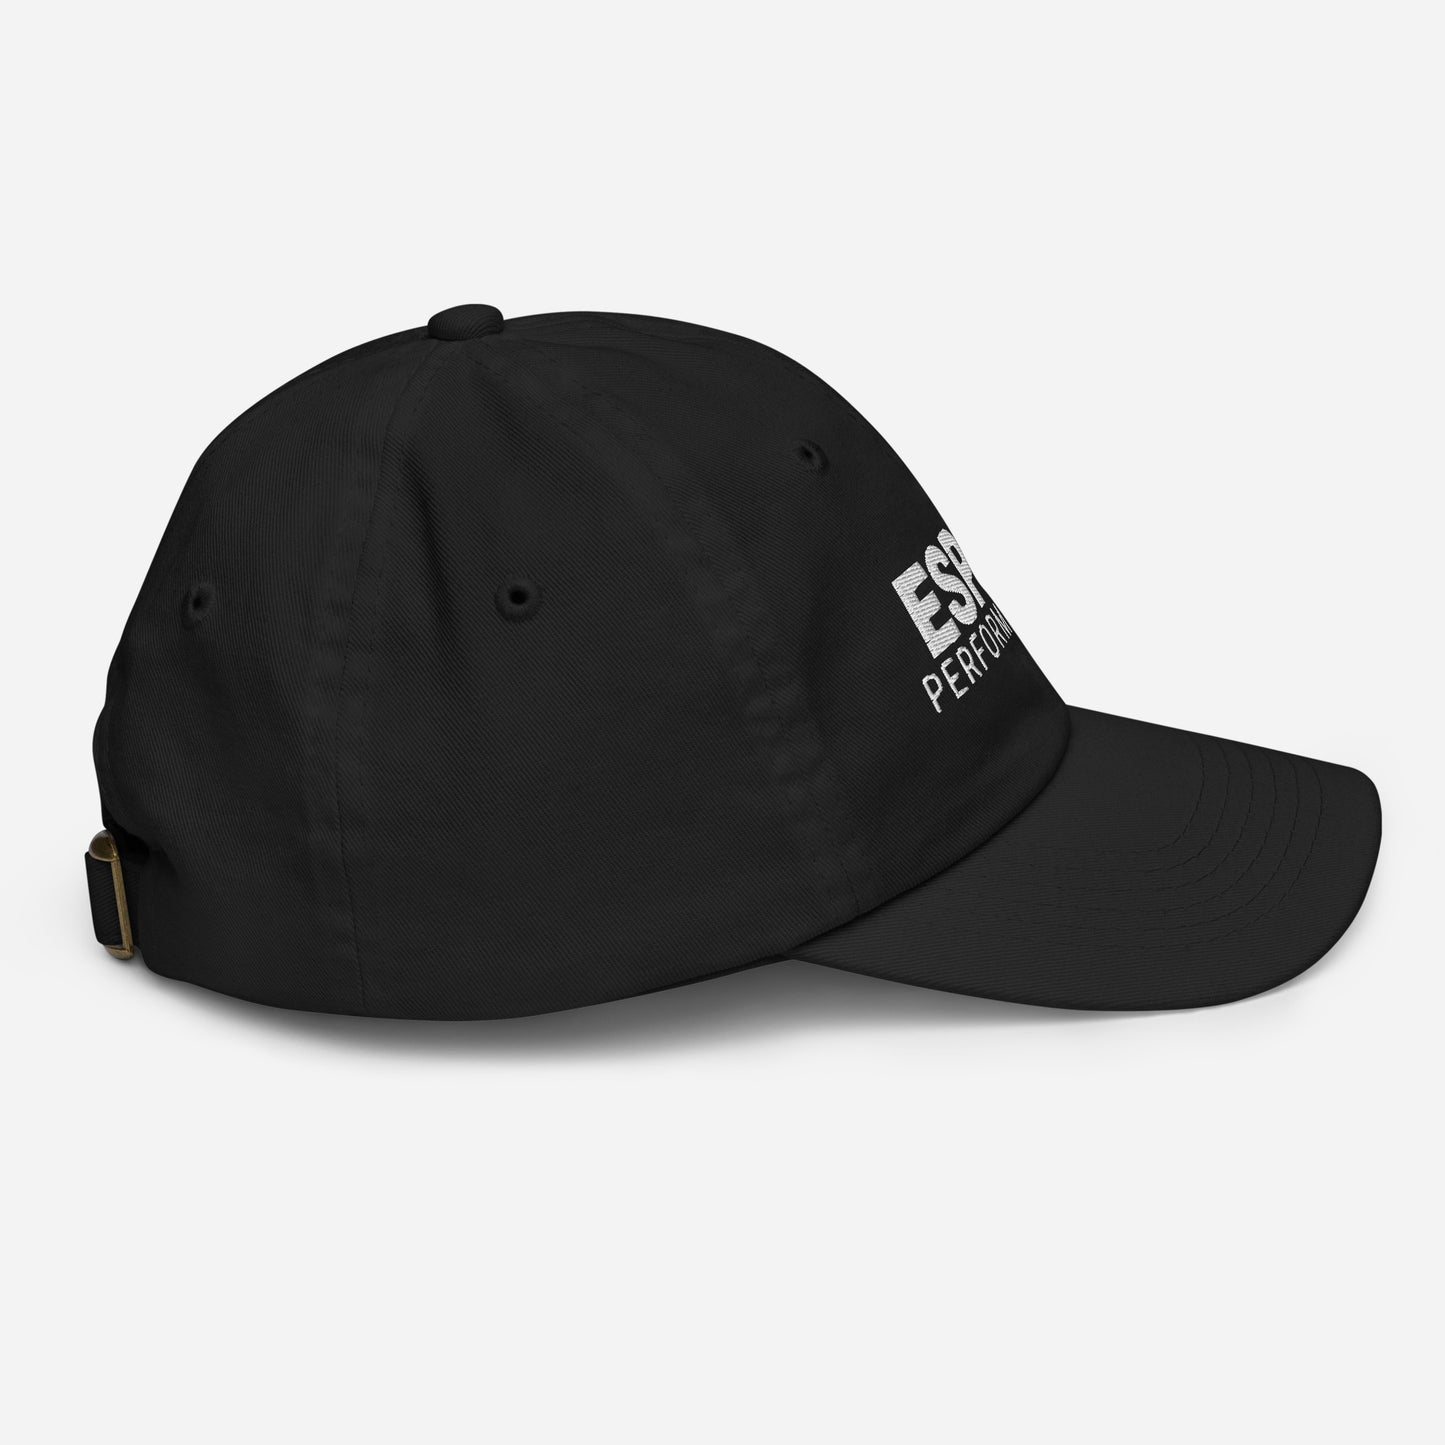 Esprit Performing Arts Hat - Youth